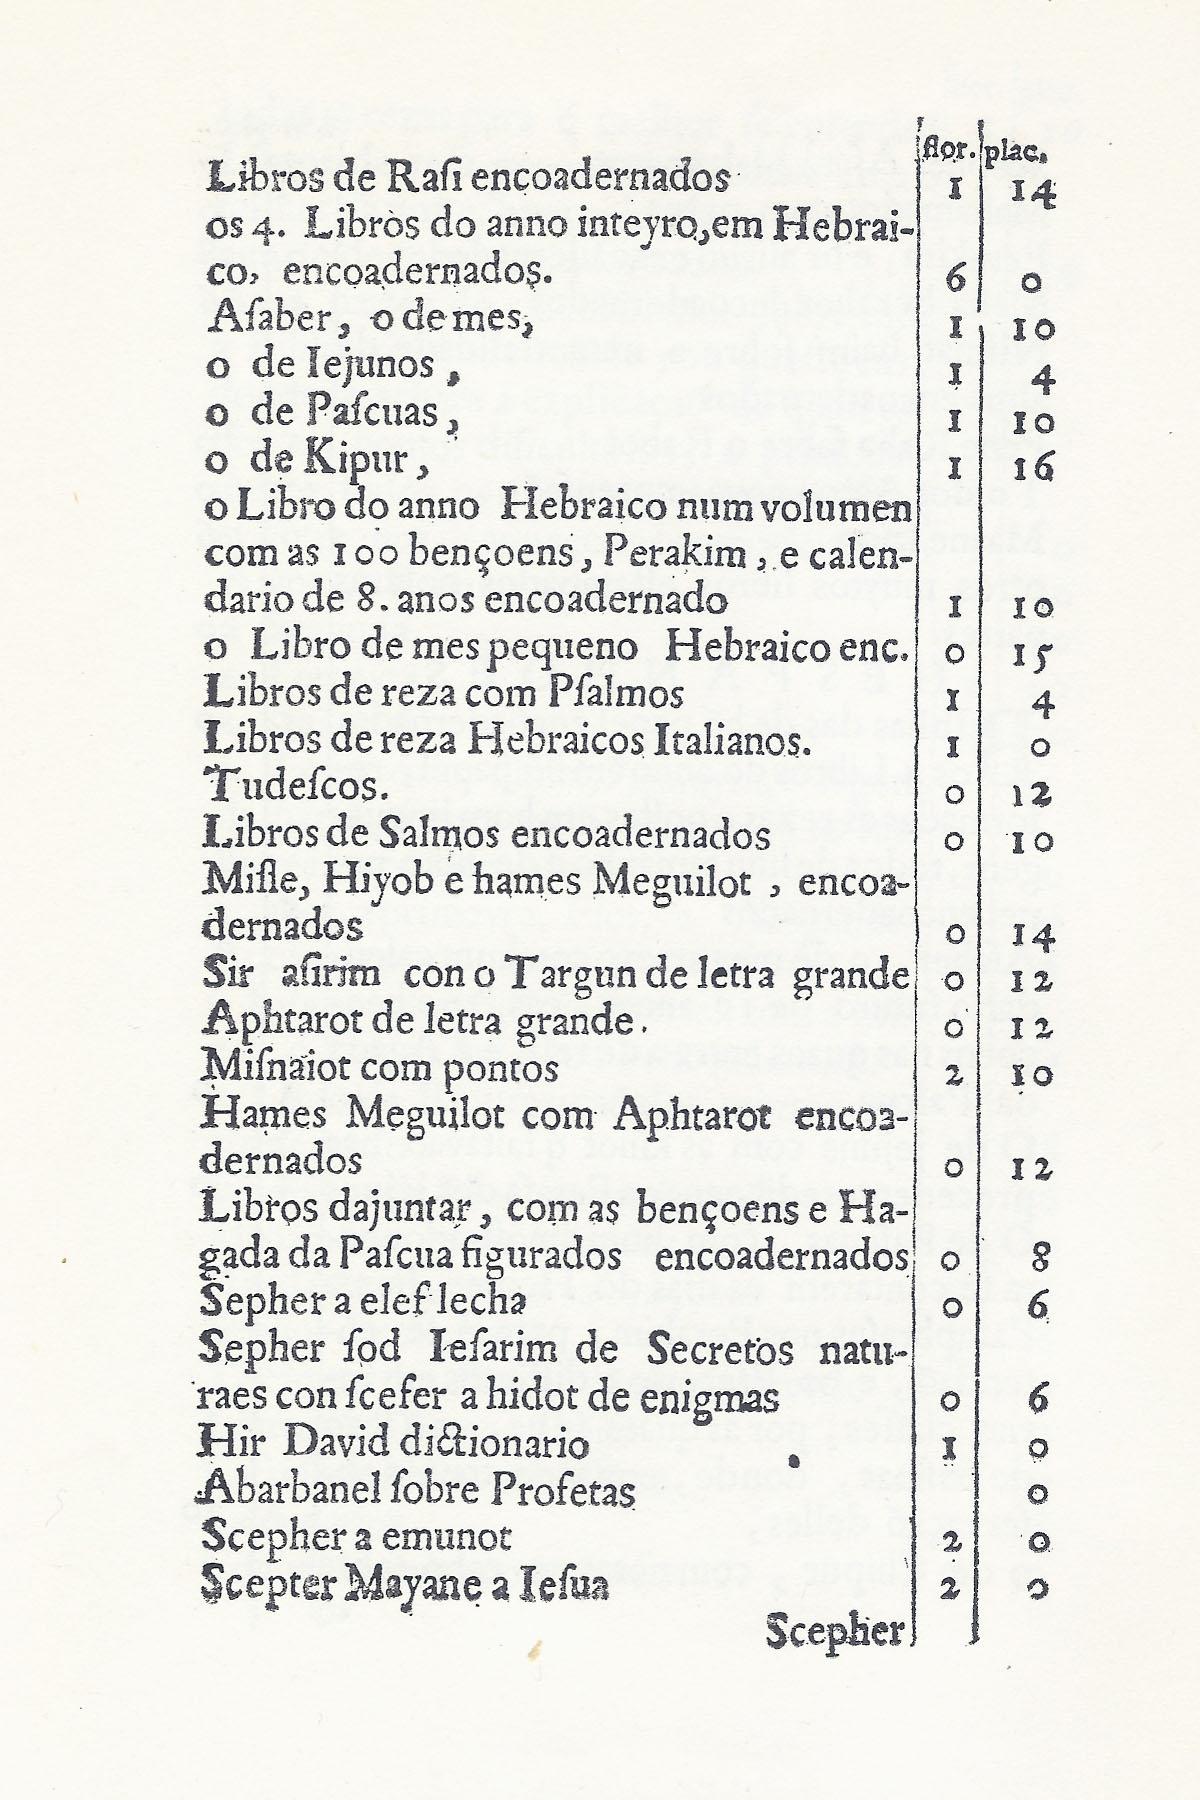 Printed page in Portuguese with two narrow columns on right of main text.